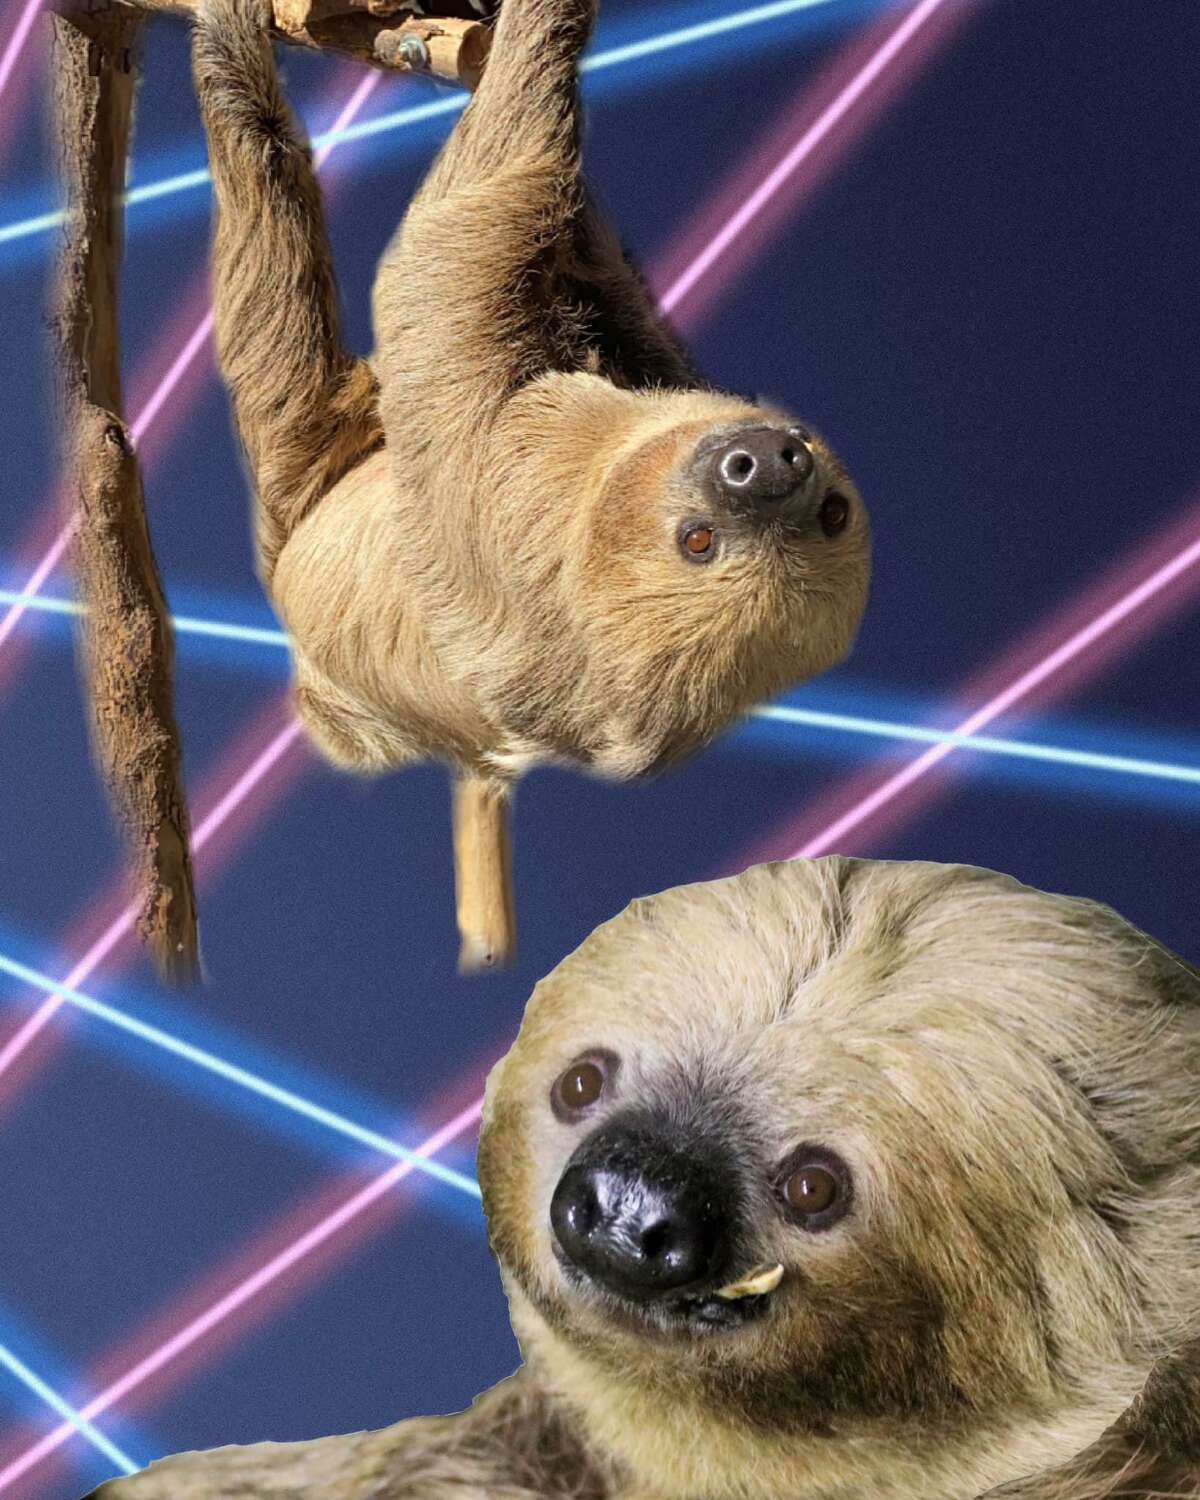 A sloth #ZooGlamourShots photo from the San Antonio Zoo. Since launching the hashtag, the zoo has posted more than a dozen other photos of its animals as cheesy throwback pics on social media, with other zoos joining in on the meme.